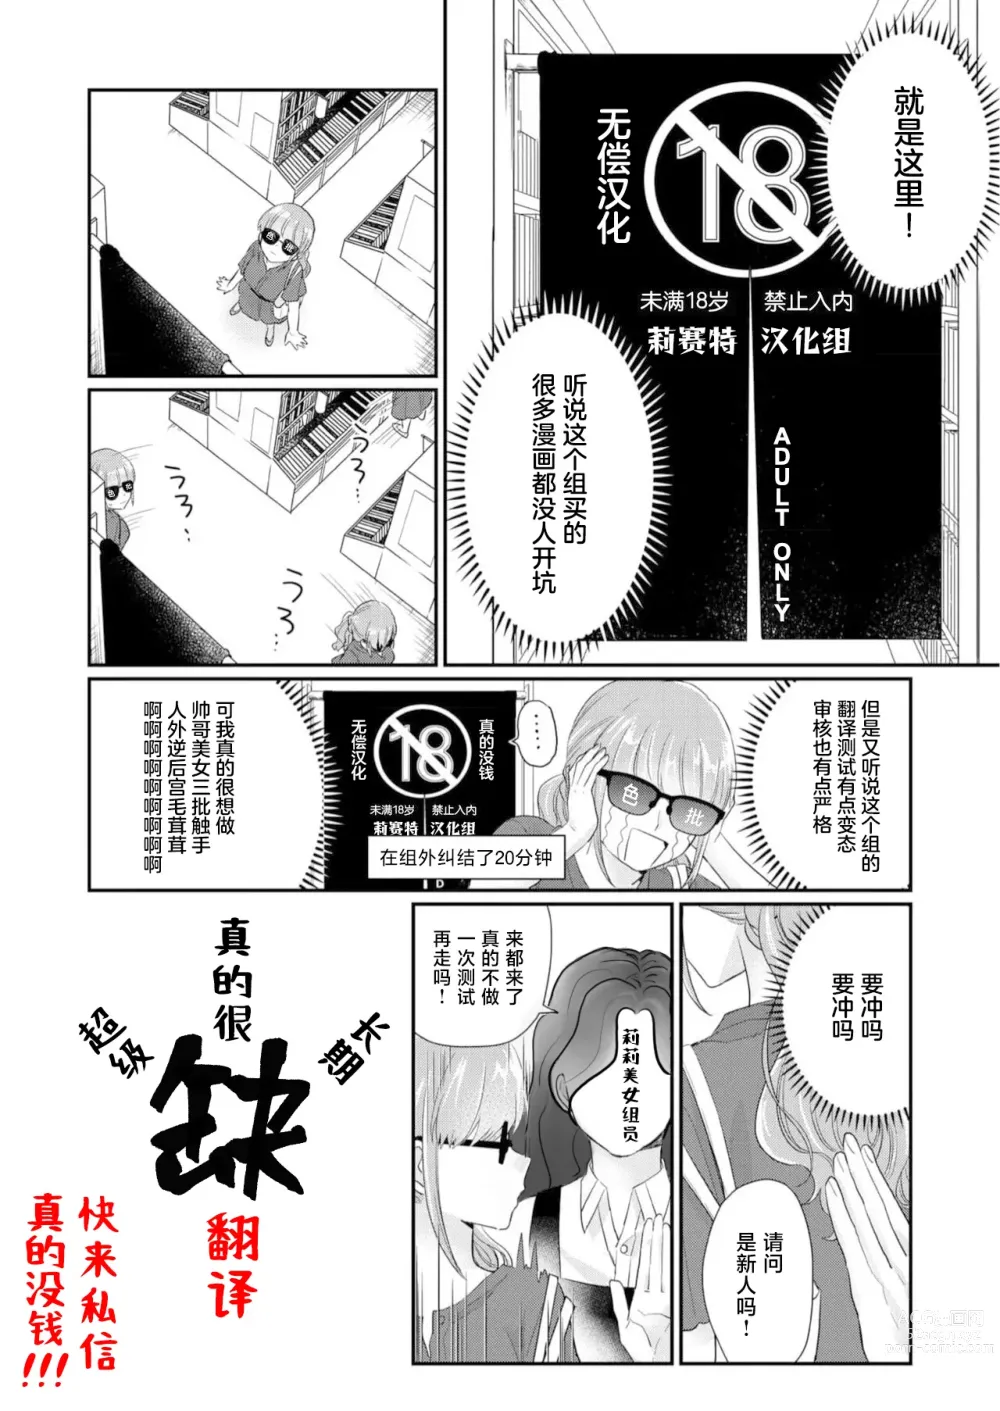 Page 88 of manga THE DIE IS CAST 1-3